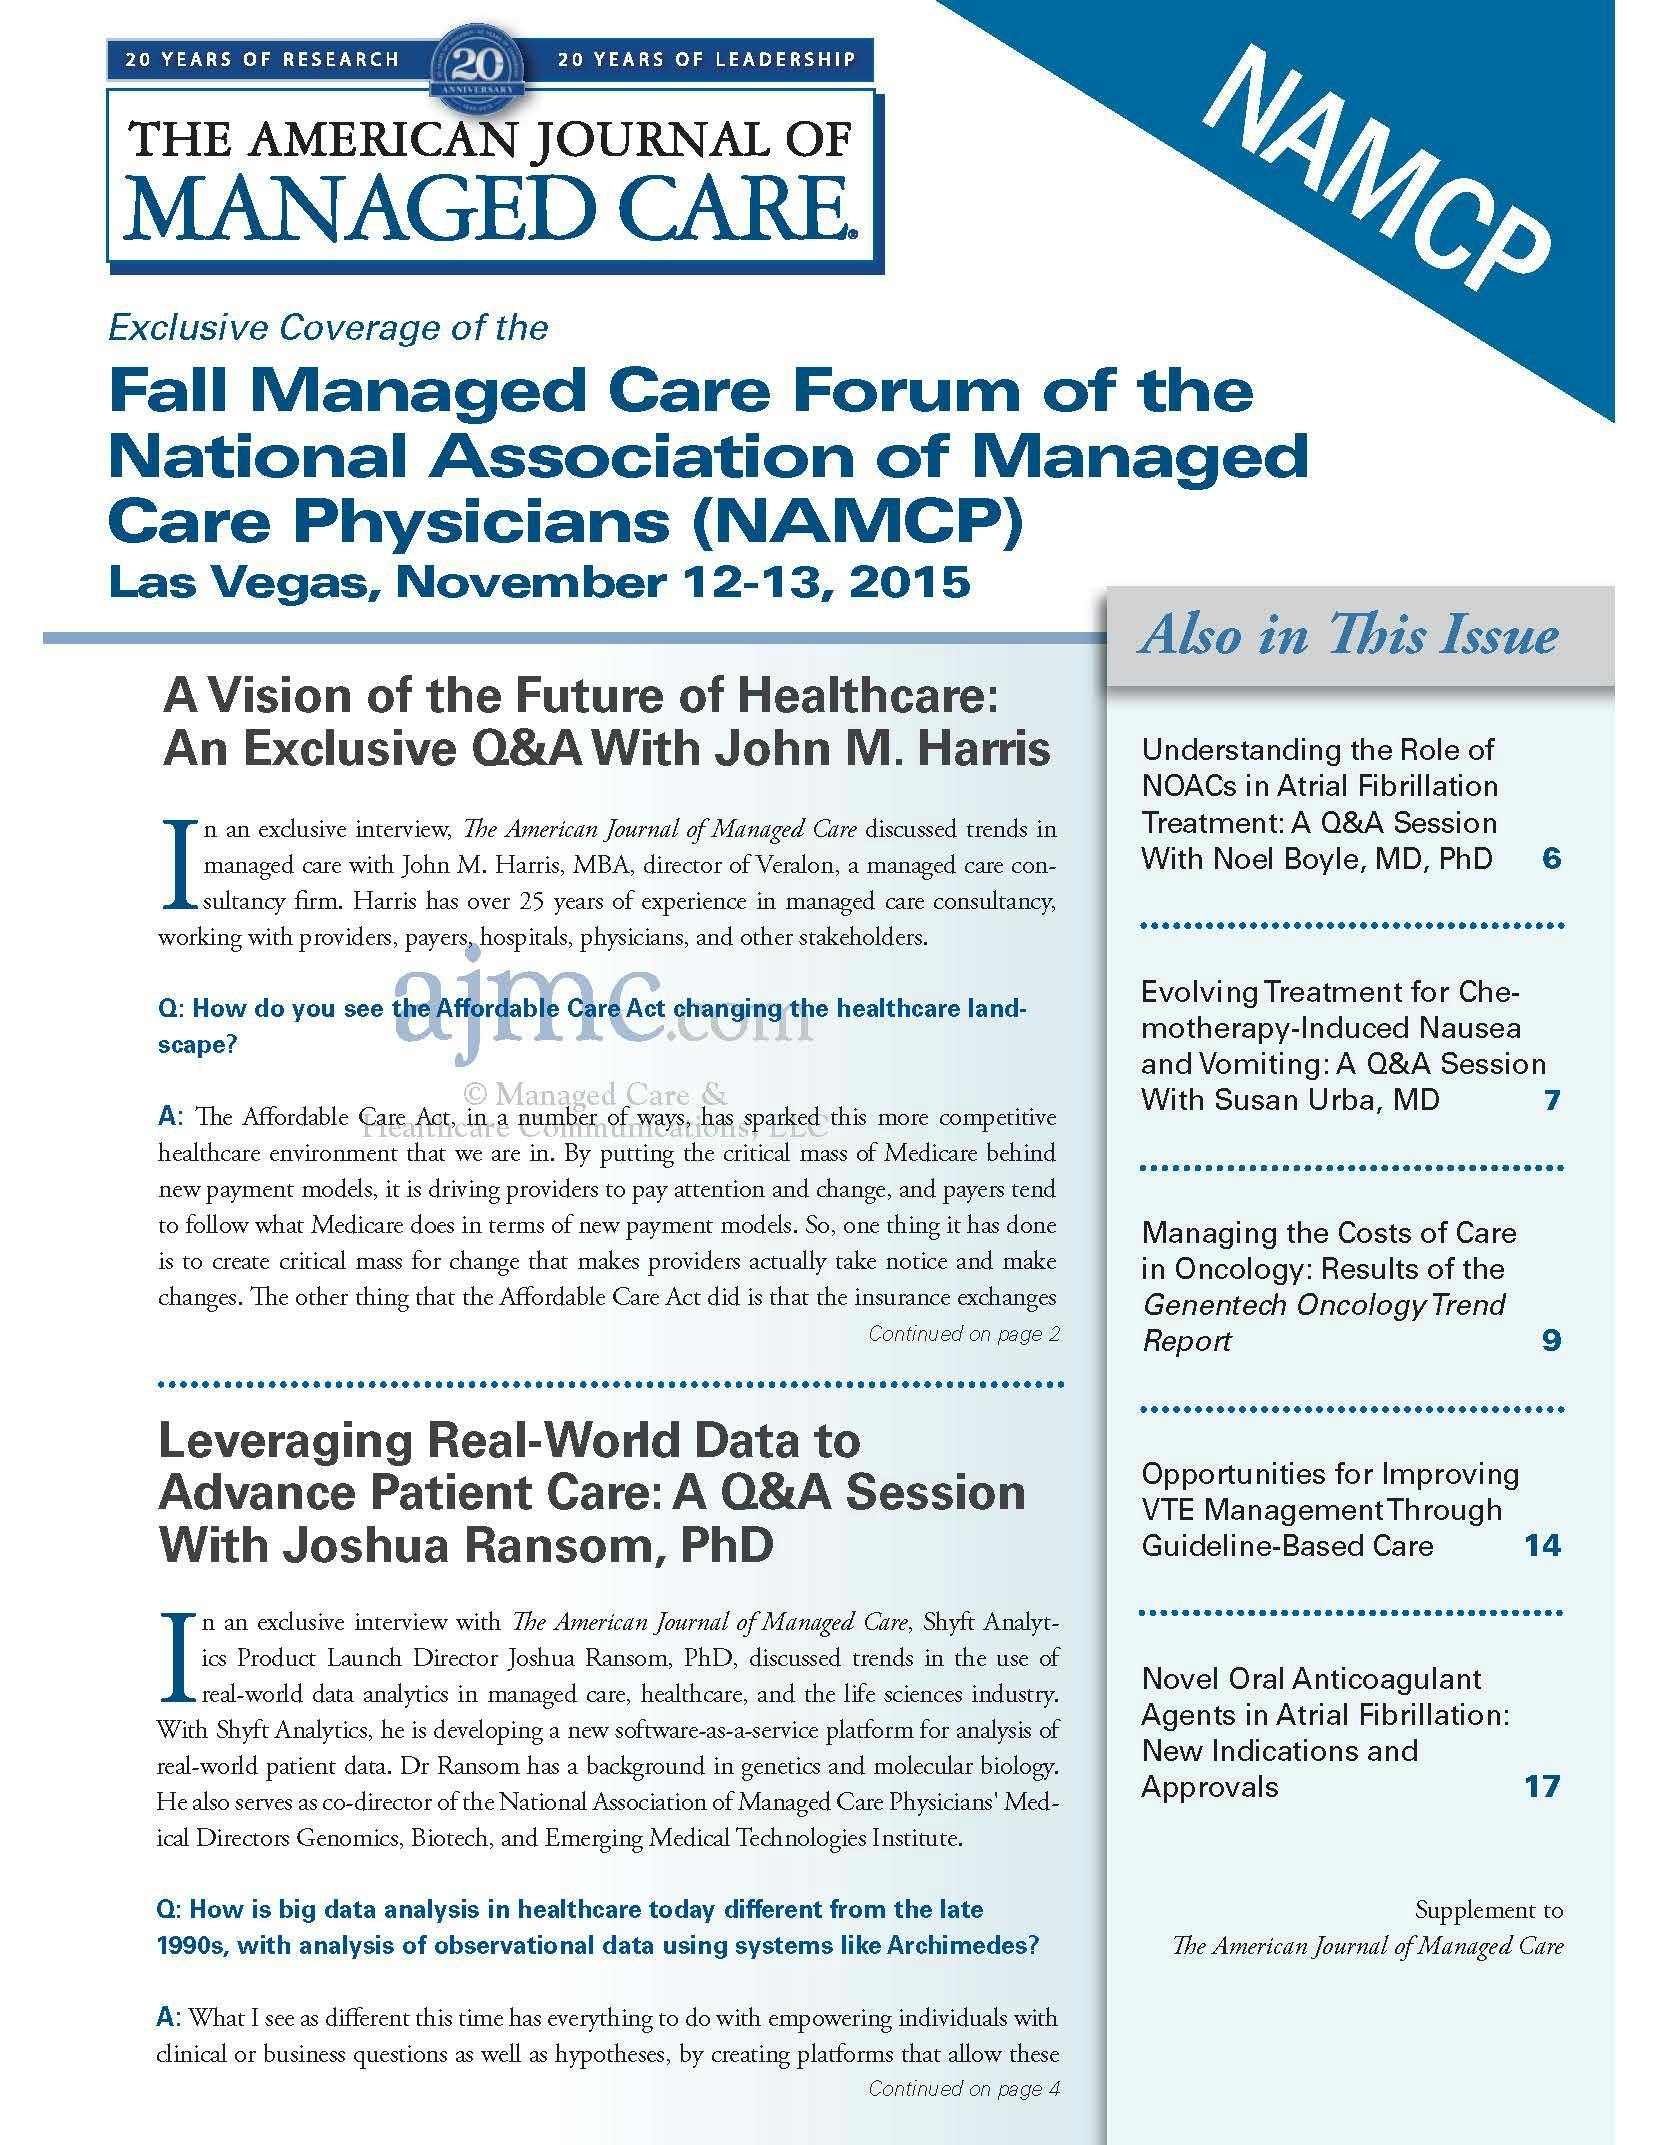 NAMCP 2015 Conference Coverage